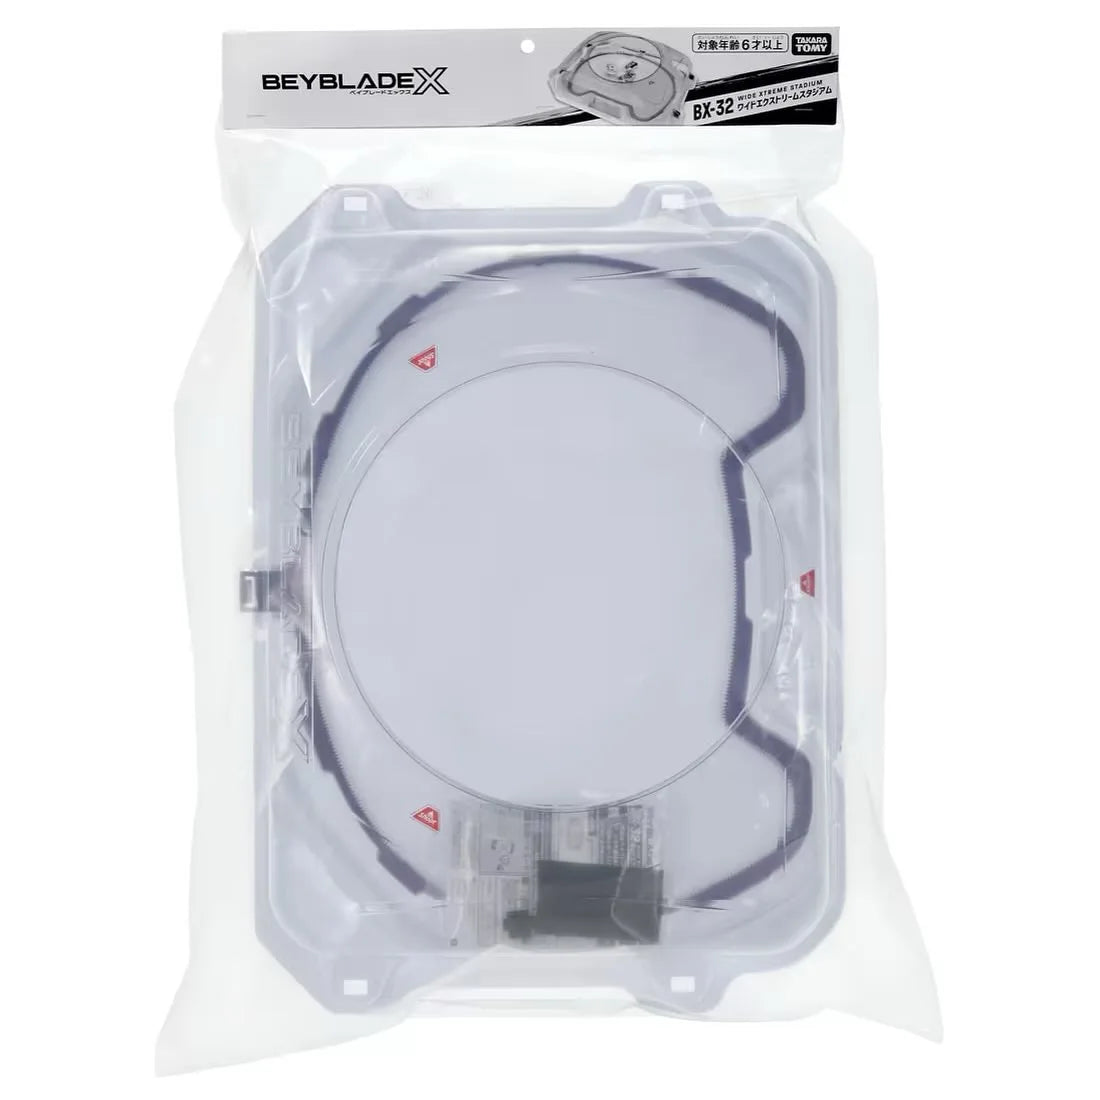 beyblade x bx-32 x-lines stadium with plastic package